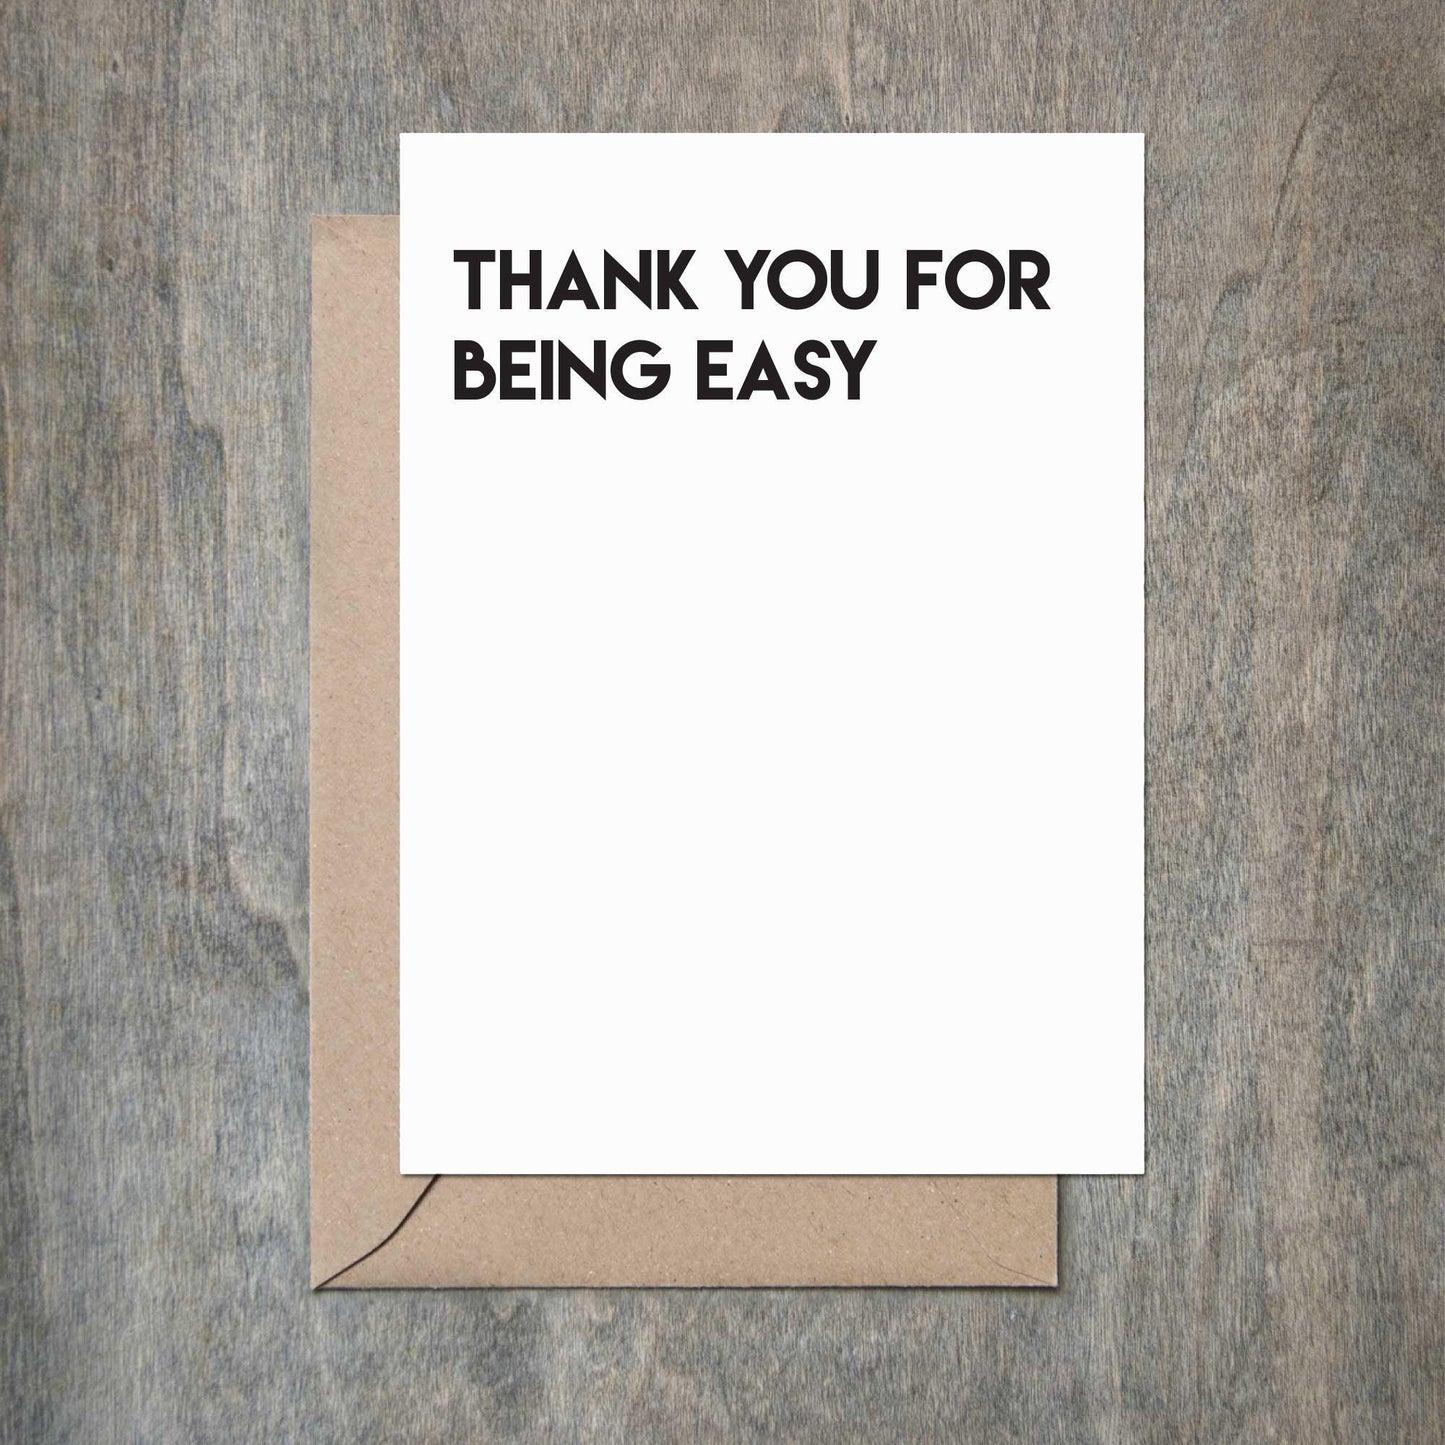 Funny Love Card Thank You for Being Easy Love Anniversary Card-Love Cards-Crimson and Clover Studio